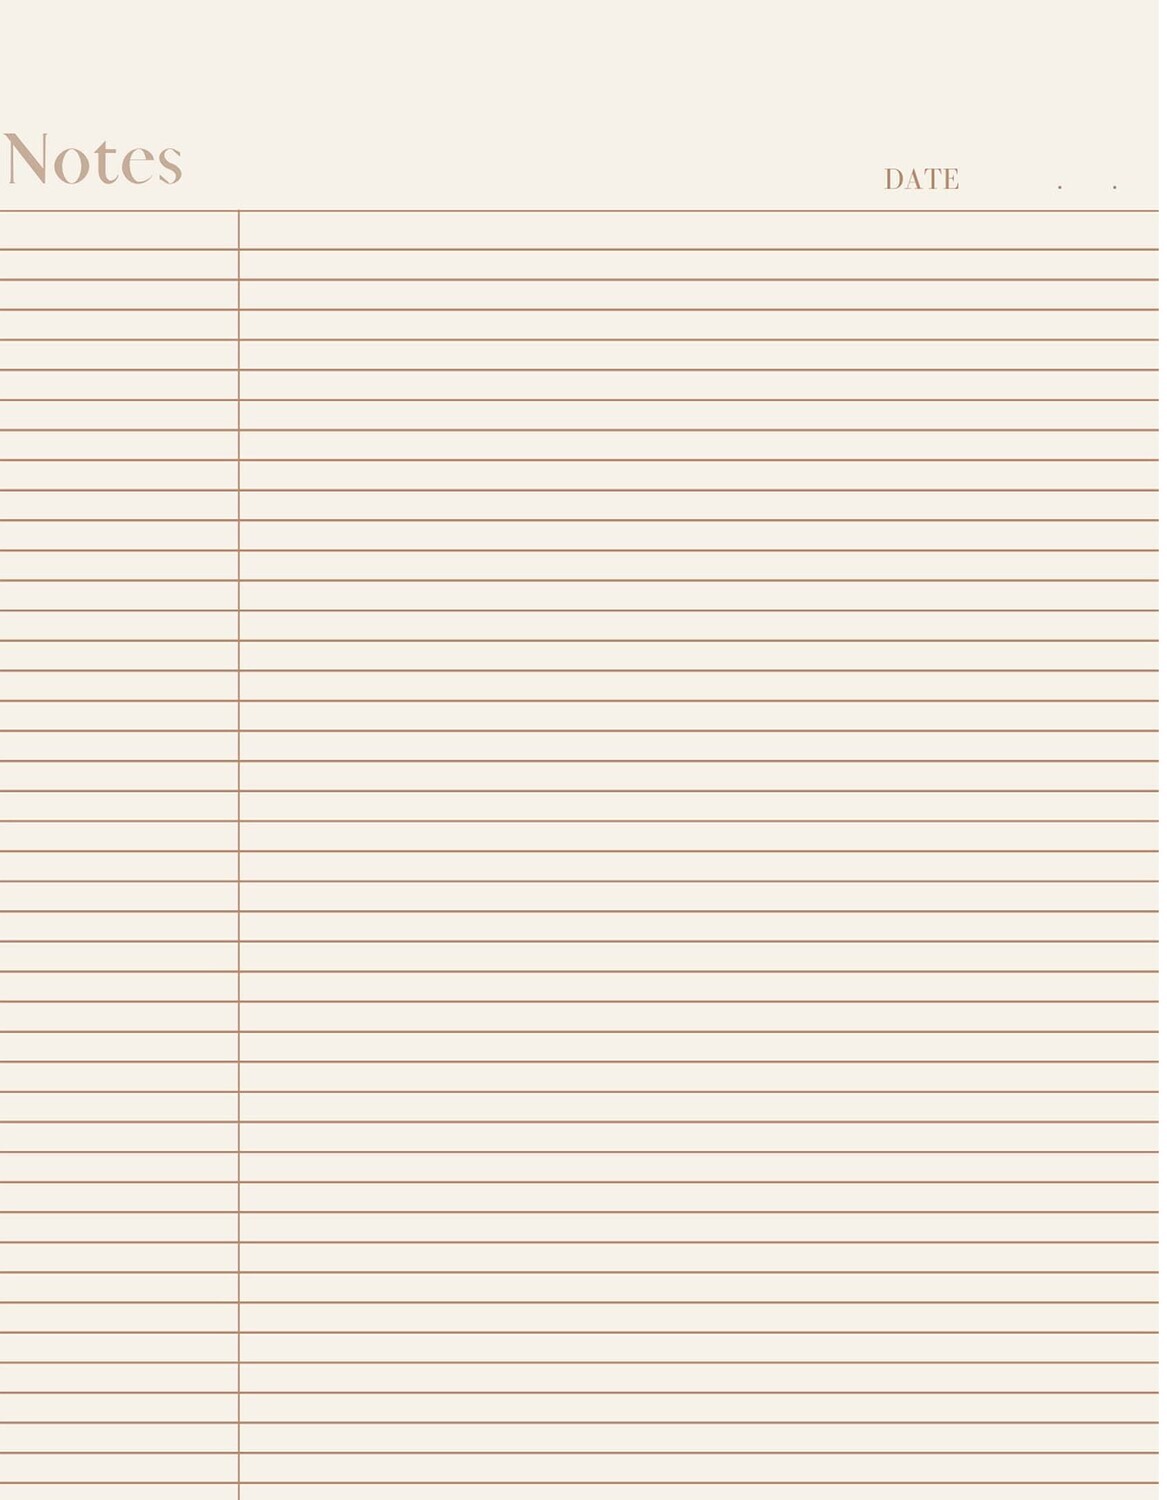 Tan and White Lined Notepad